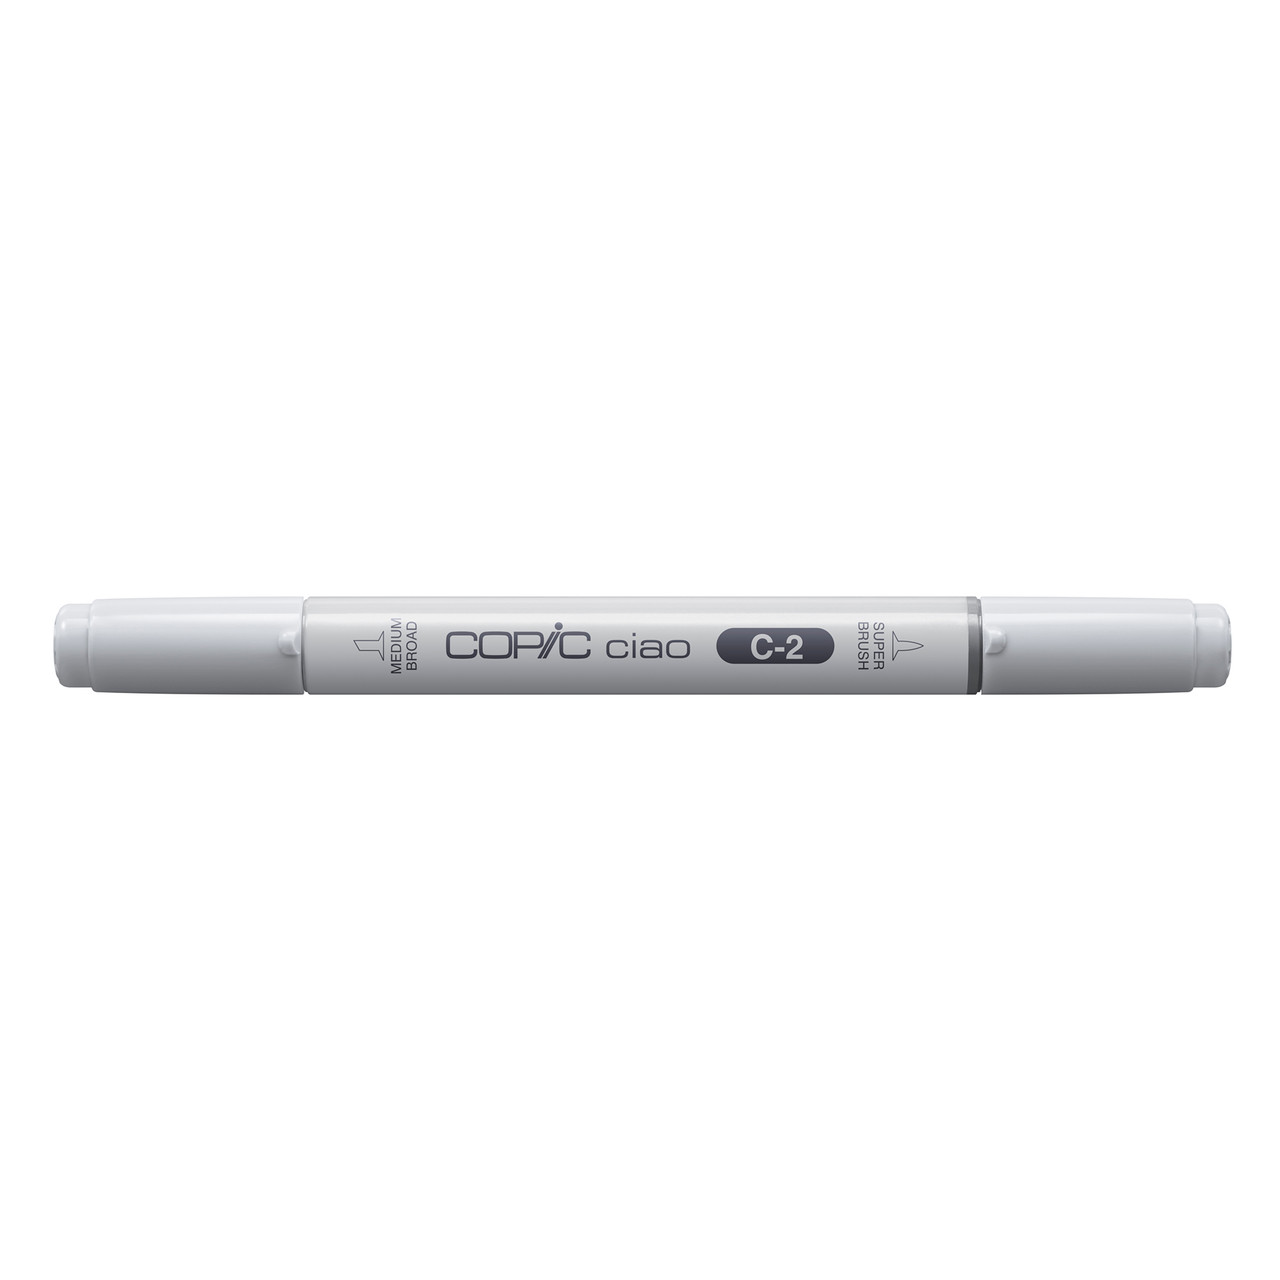 Copic Copic Ciao Marker Cool Gray No. 2 C-2 (One Size, Cool Grey No. 2 C2)